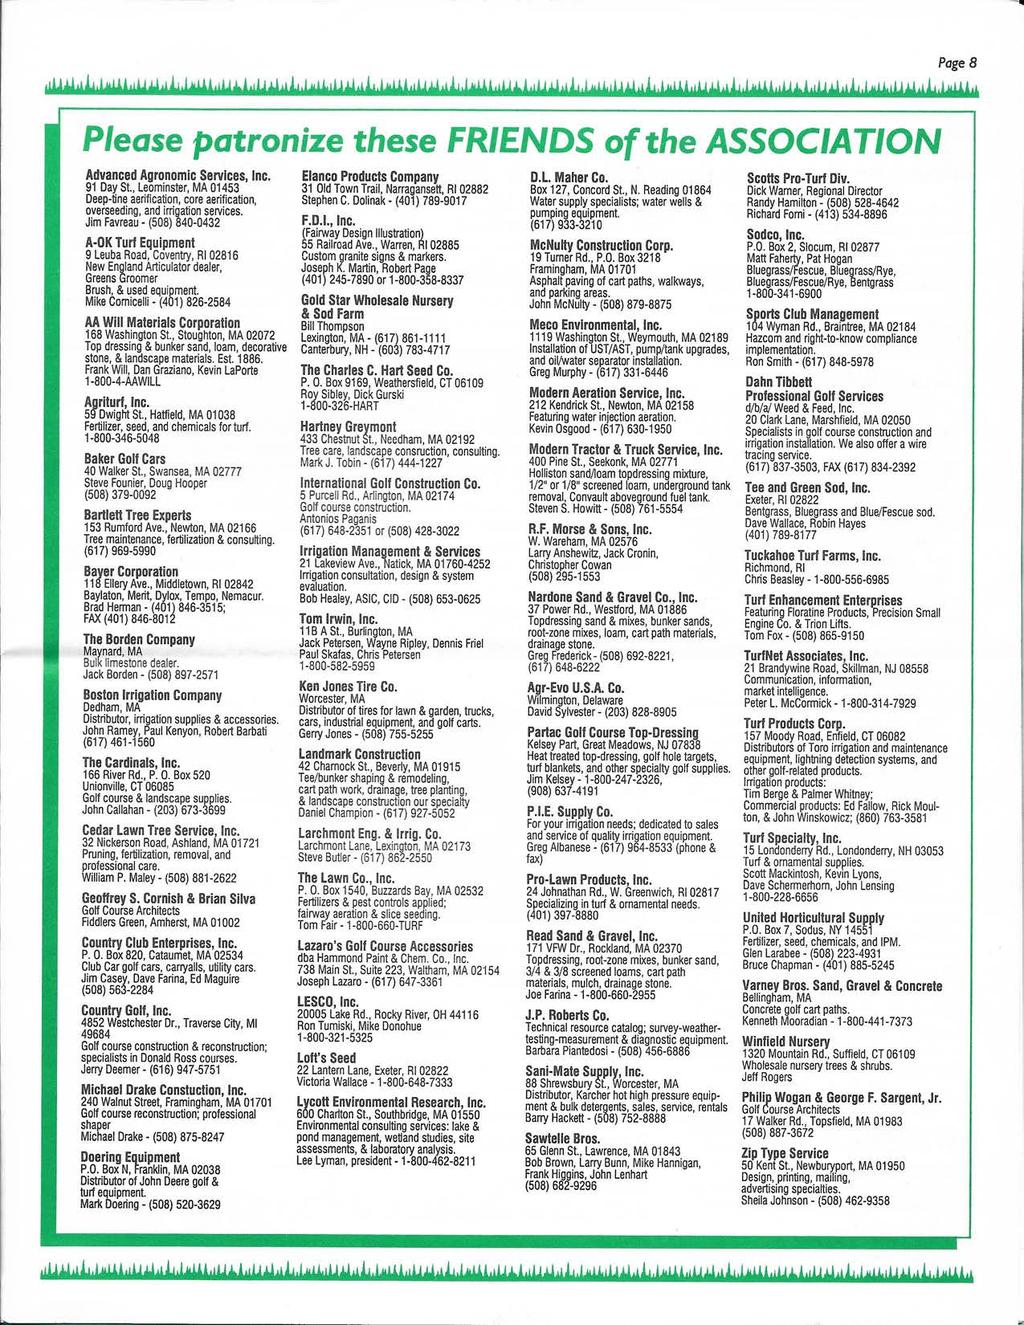 Page 4 Please patronize these FRIENDS of the ASSOCIATION Advanced Agronomic Services, Inc. 91 Day St.